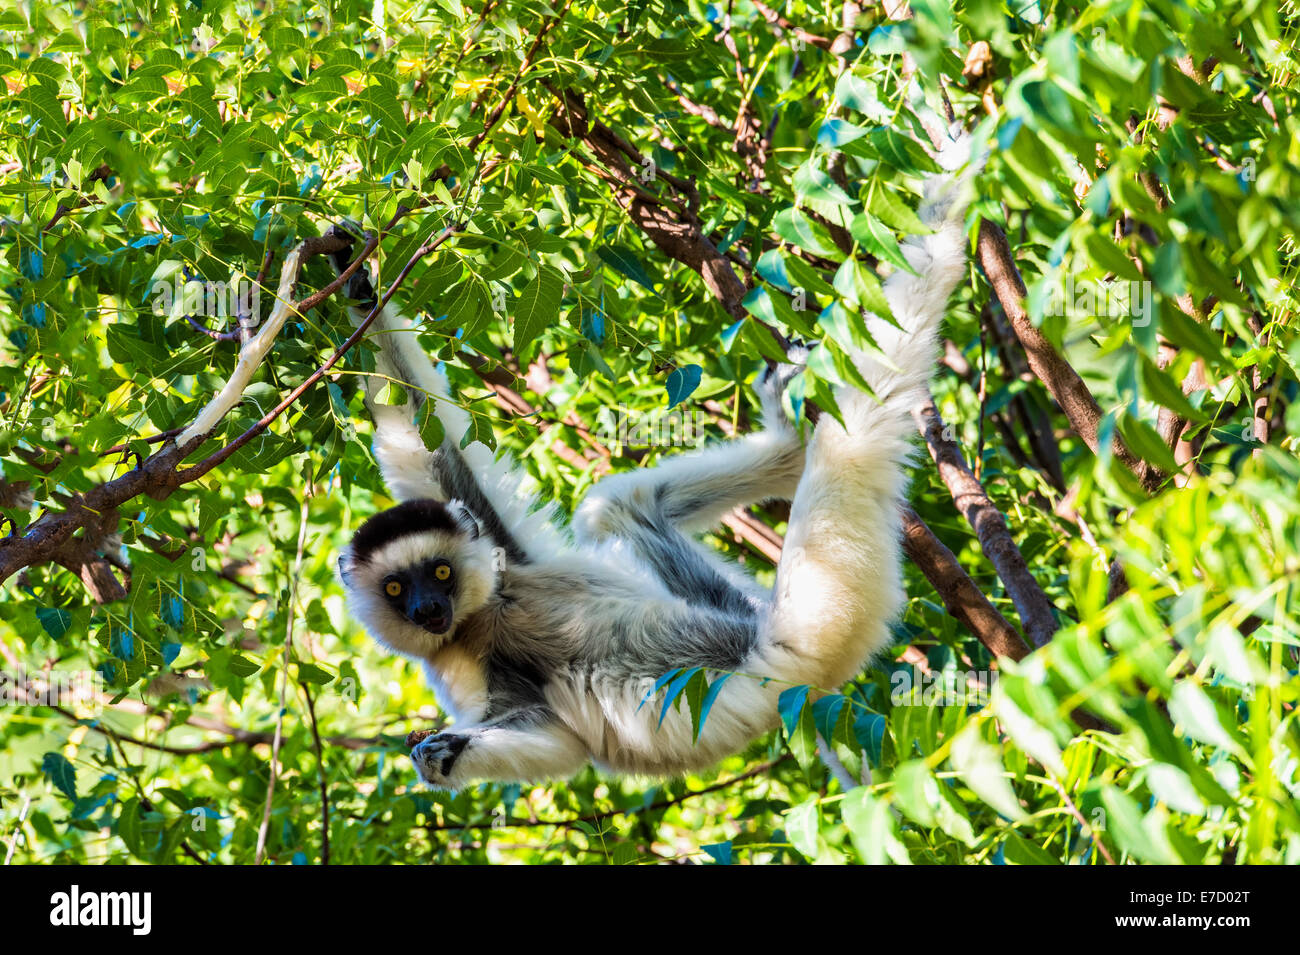 Verreaux's sifaka (Propithecus verreauxi) jumping from a tree, Berenty nature reserve, Fort Dauphin, Madagascar Stock Photo